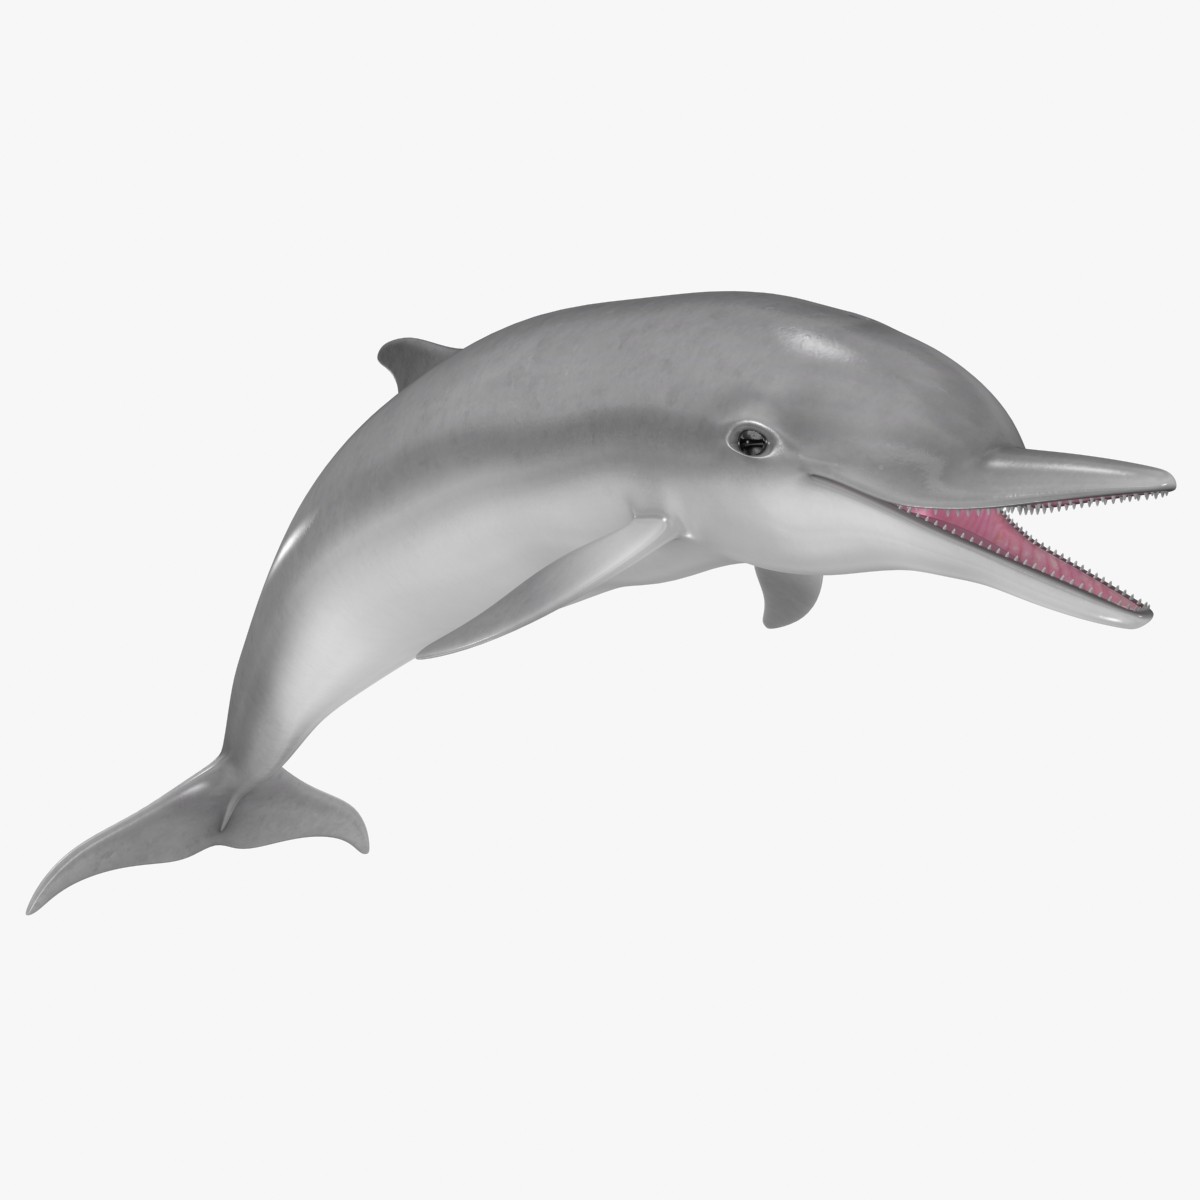 Clip Arts Related To : bottlenose dolphin. view all Animated Dolphins). 